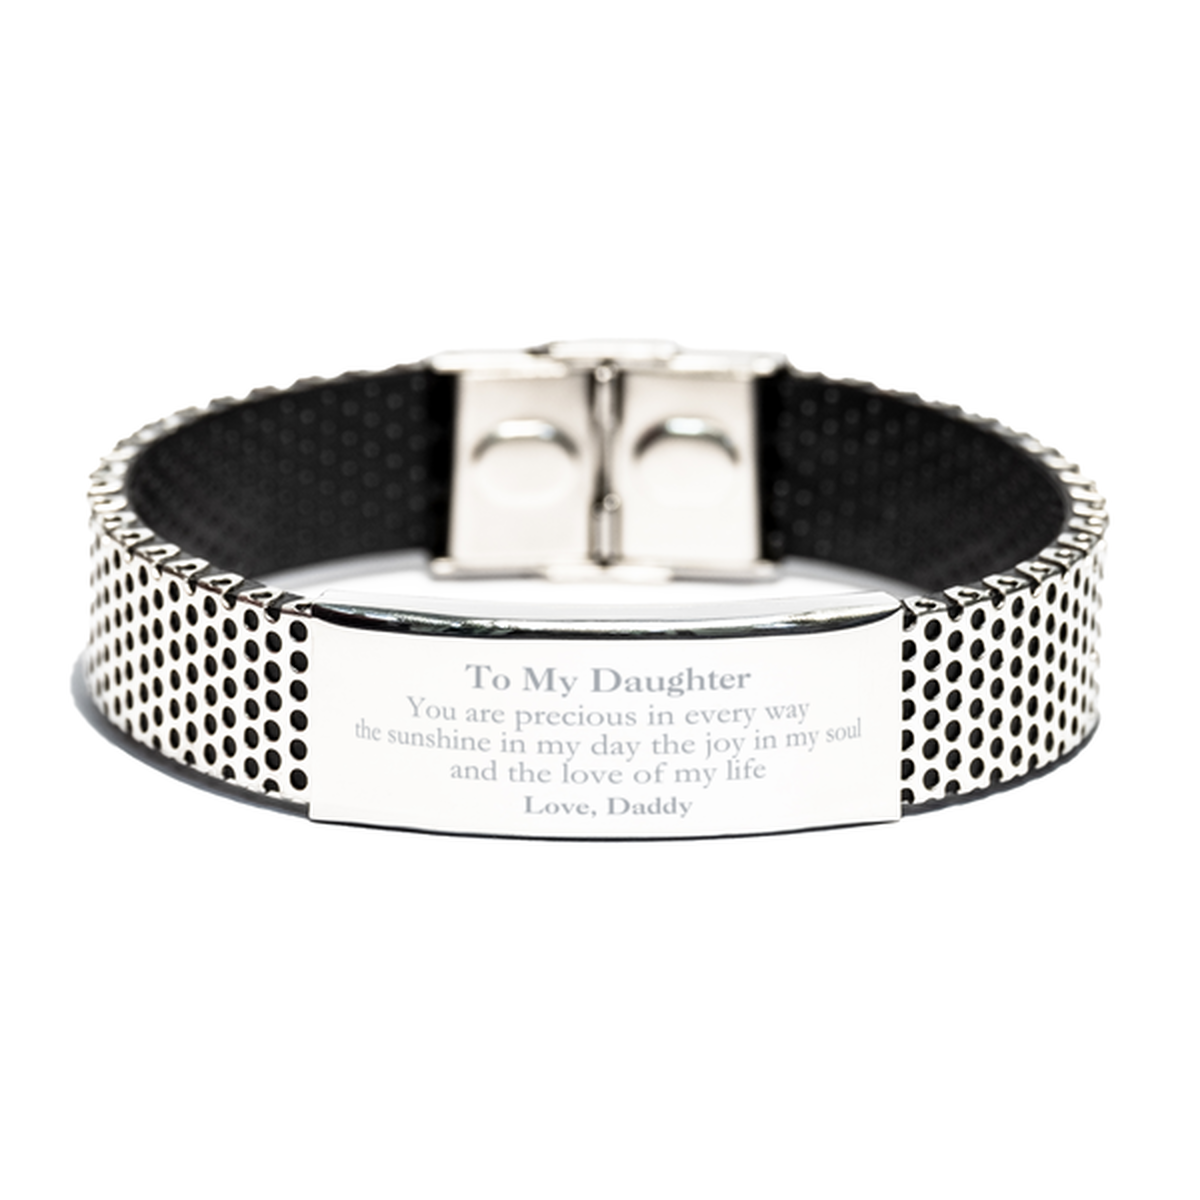 Graduation Gifts for Daughter Stainless Steel Bracelet Present from Daddy, Christmas Daughter Birthday Gifts Daughter You are precious in every way the sunshine in my day. Love, Daddy